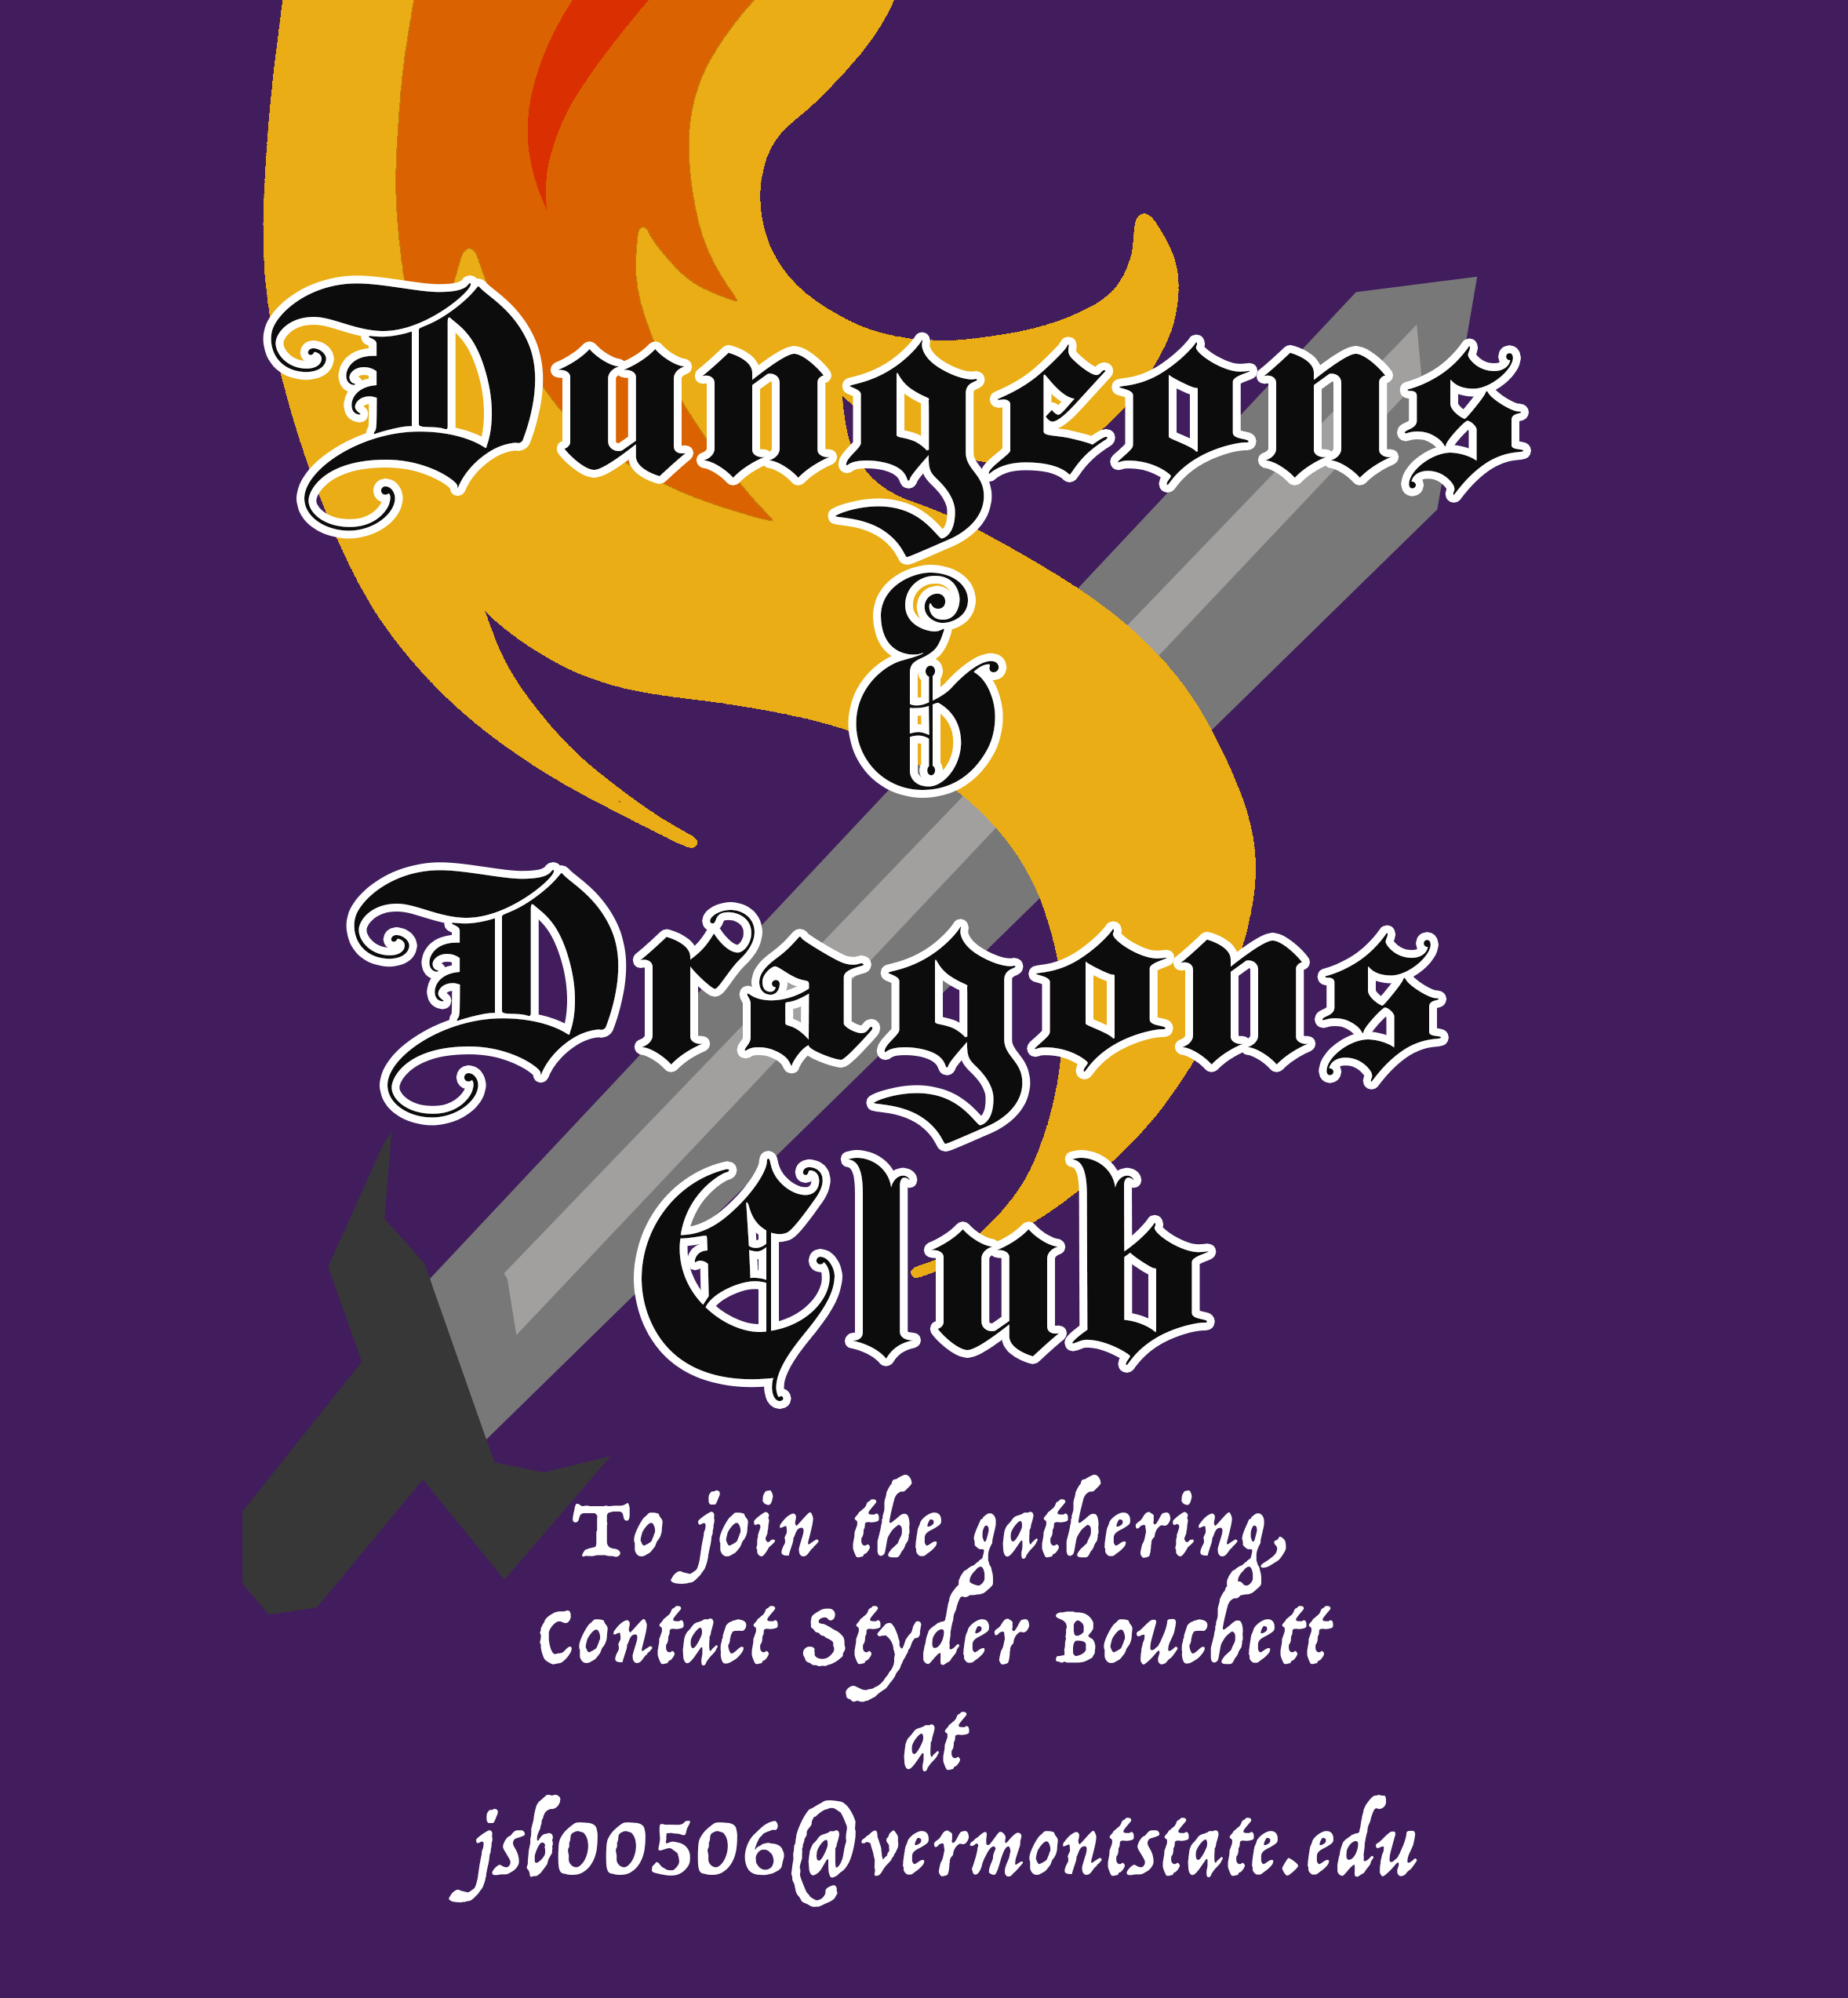 Dungeons and Dragons Club!